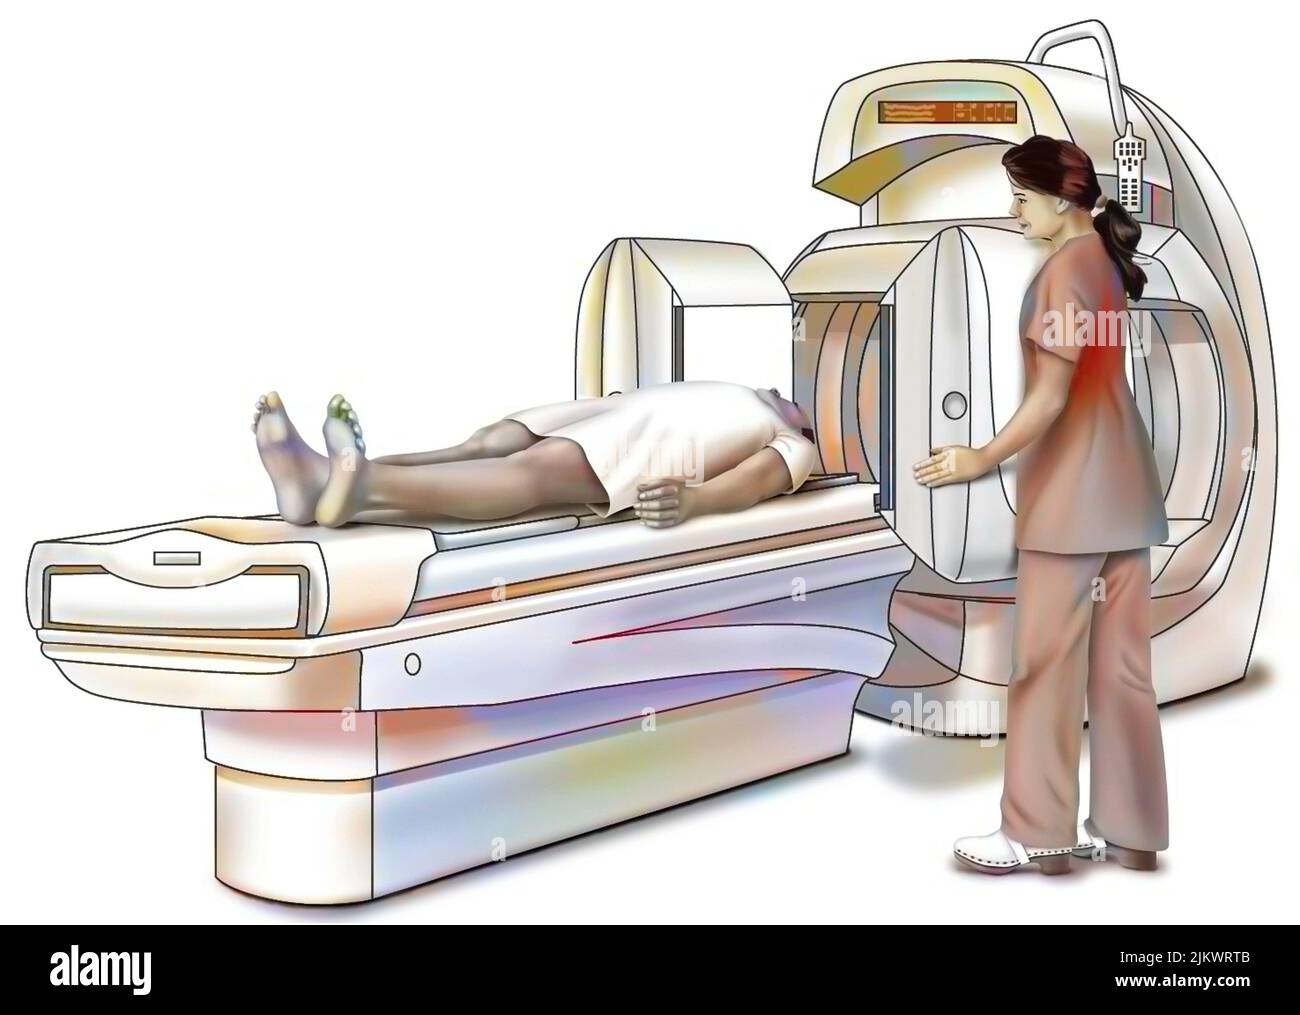 Representation of a scanner, medical imaging device. Stock Photo